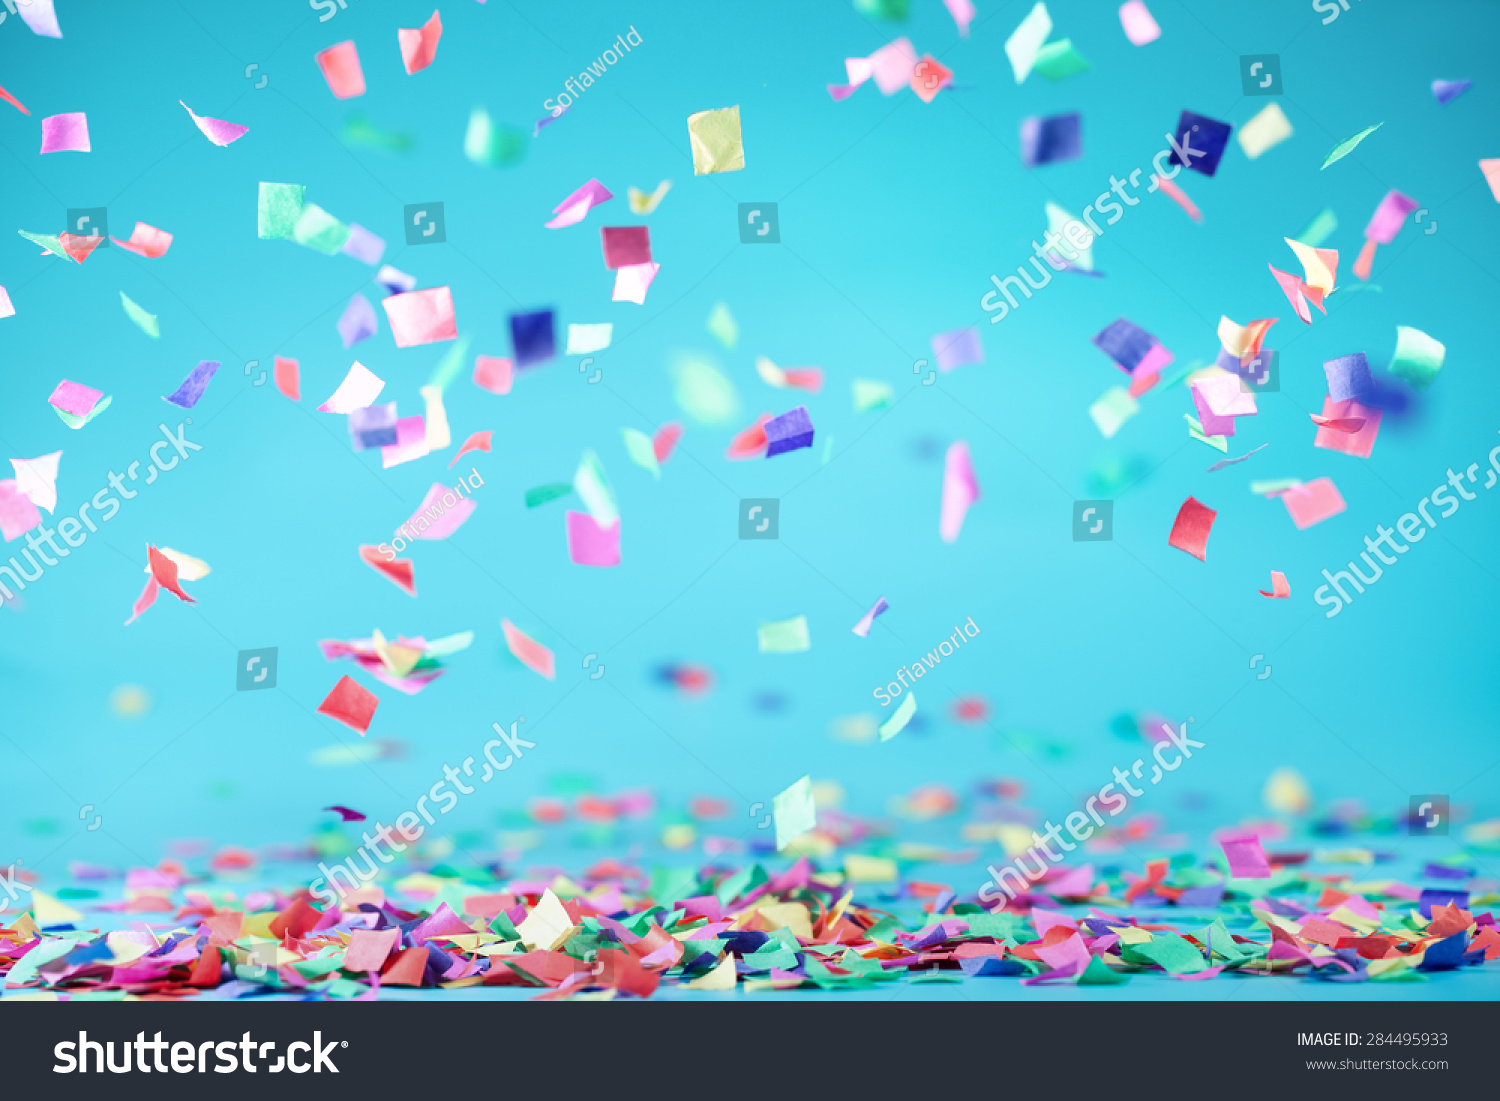 Colored confetti flying on blue background #284495933